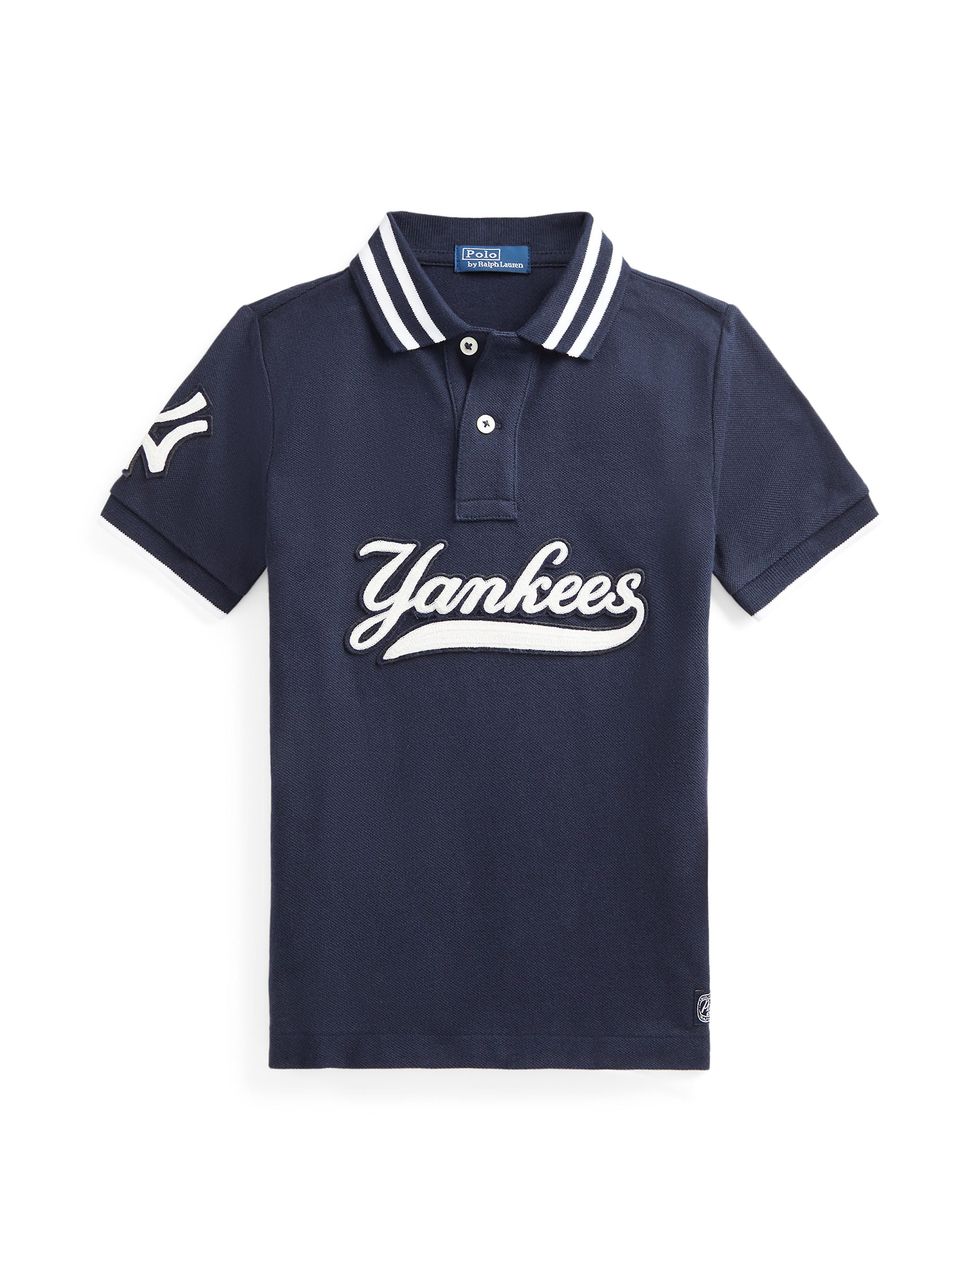 Polo Ralph Lauren x New York Yankees 'Limited Edition/50th